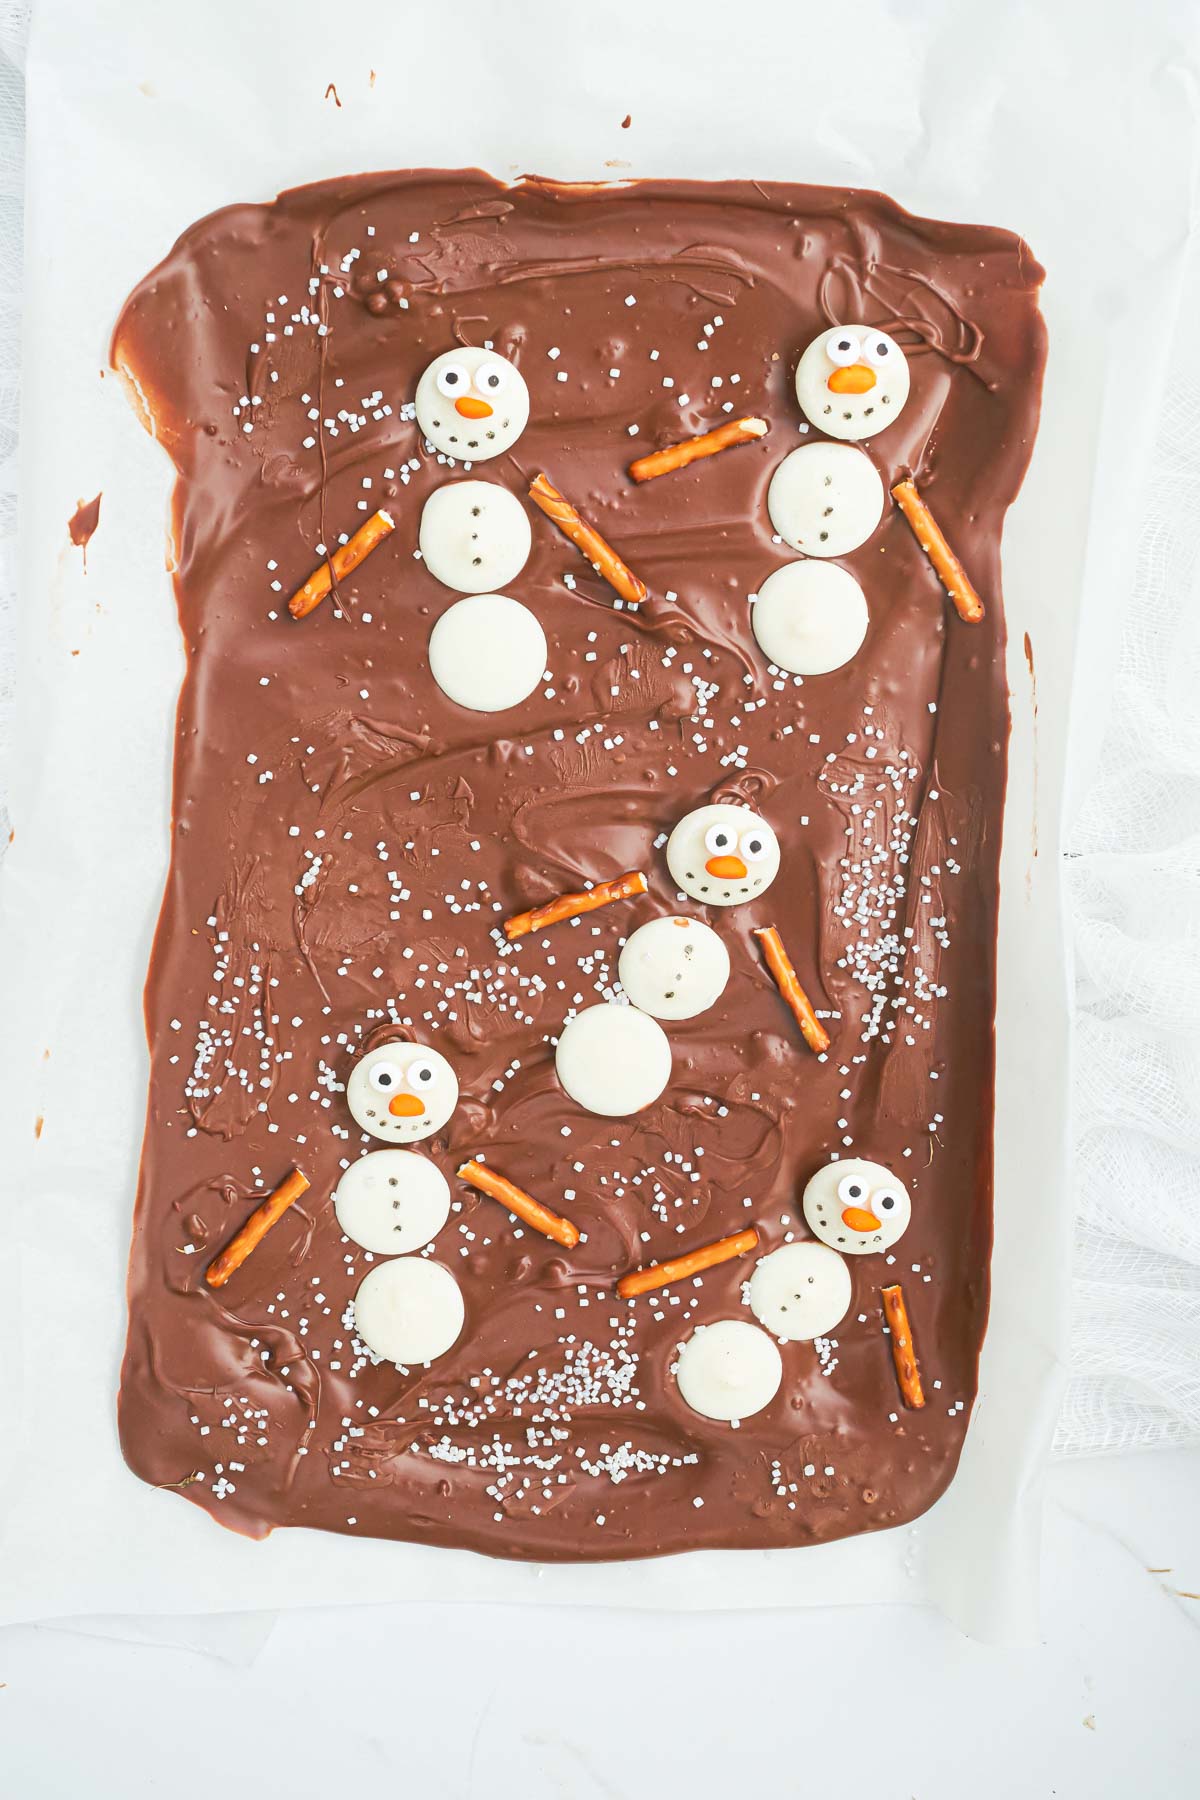 the completed melted snowman chocolate bark recipe